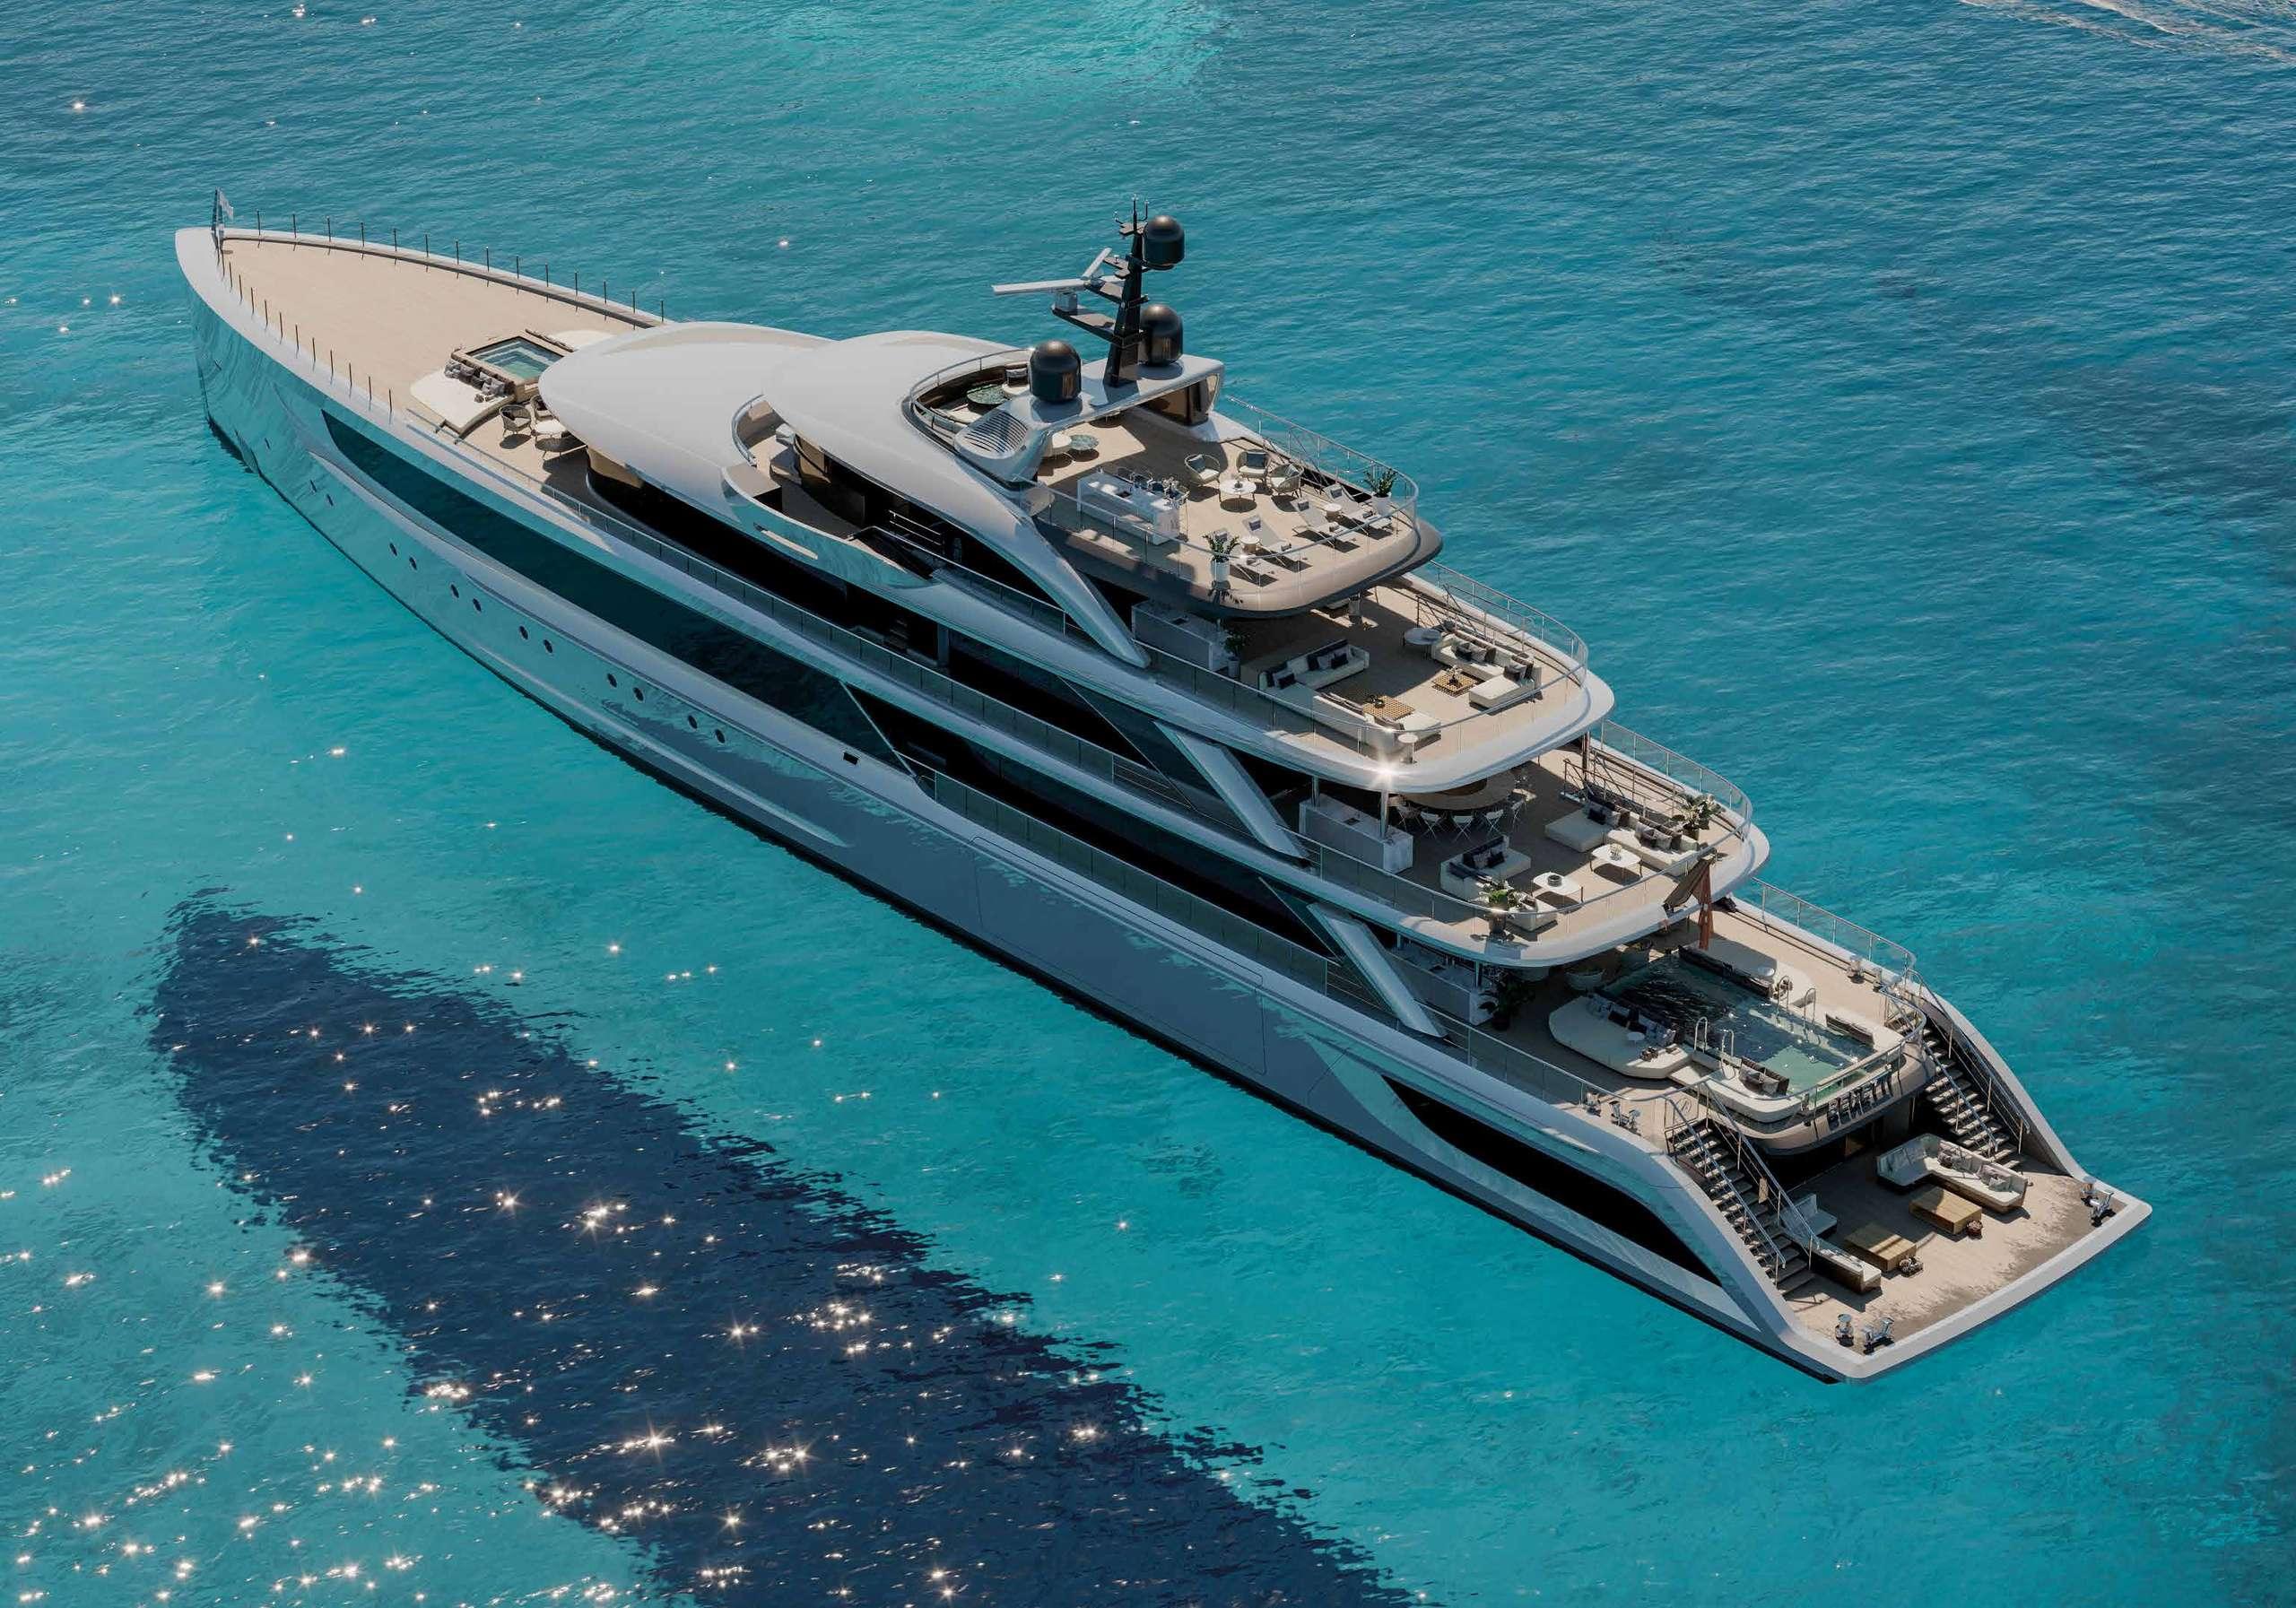 75m private yacht